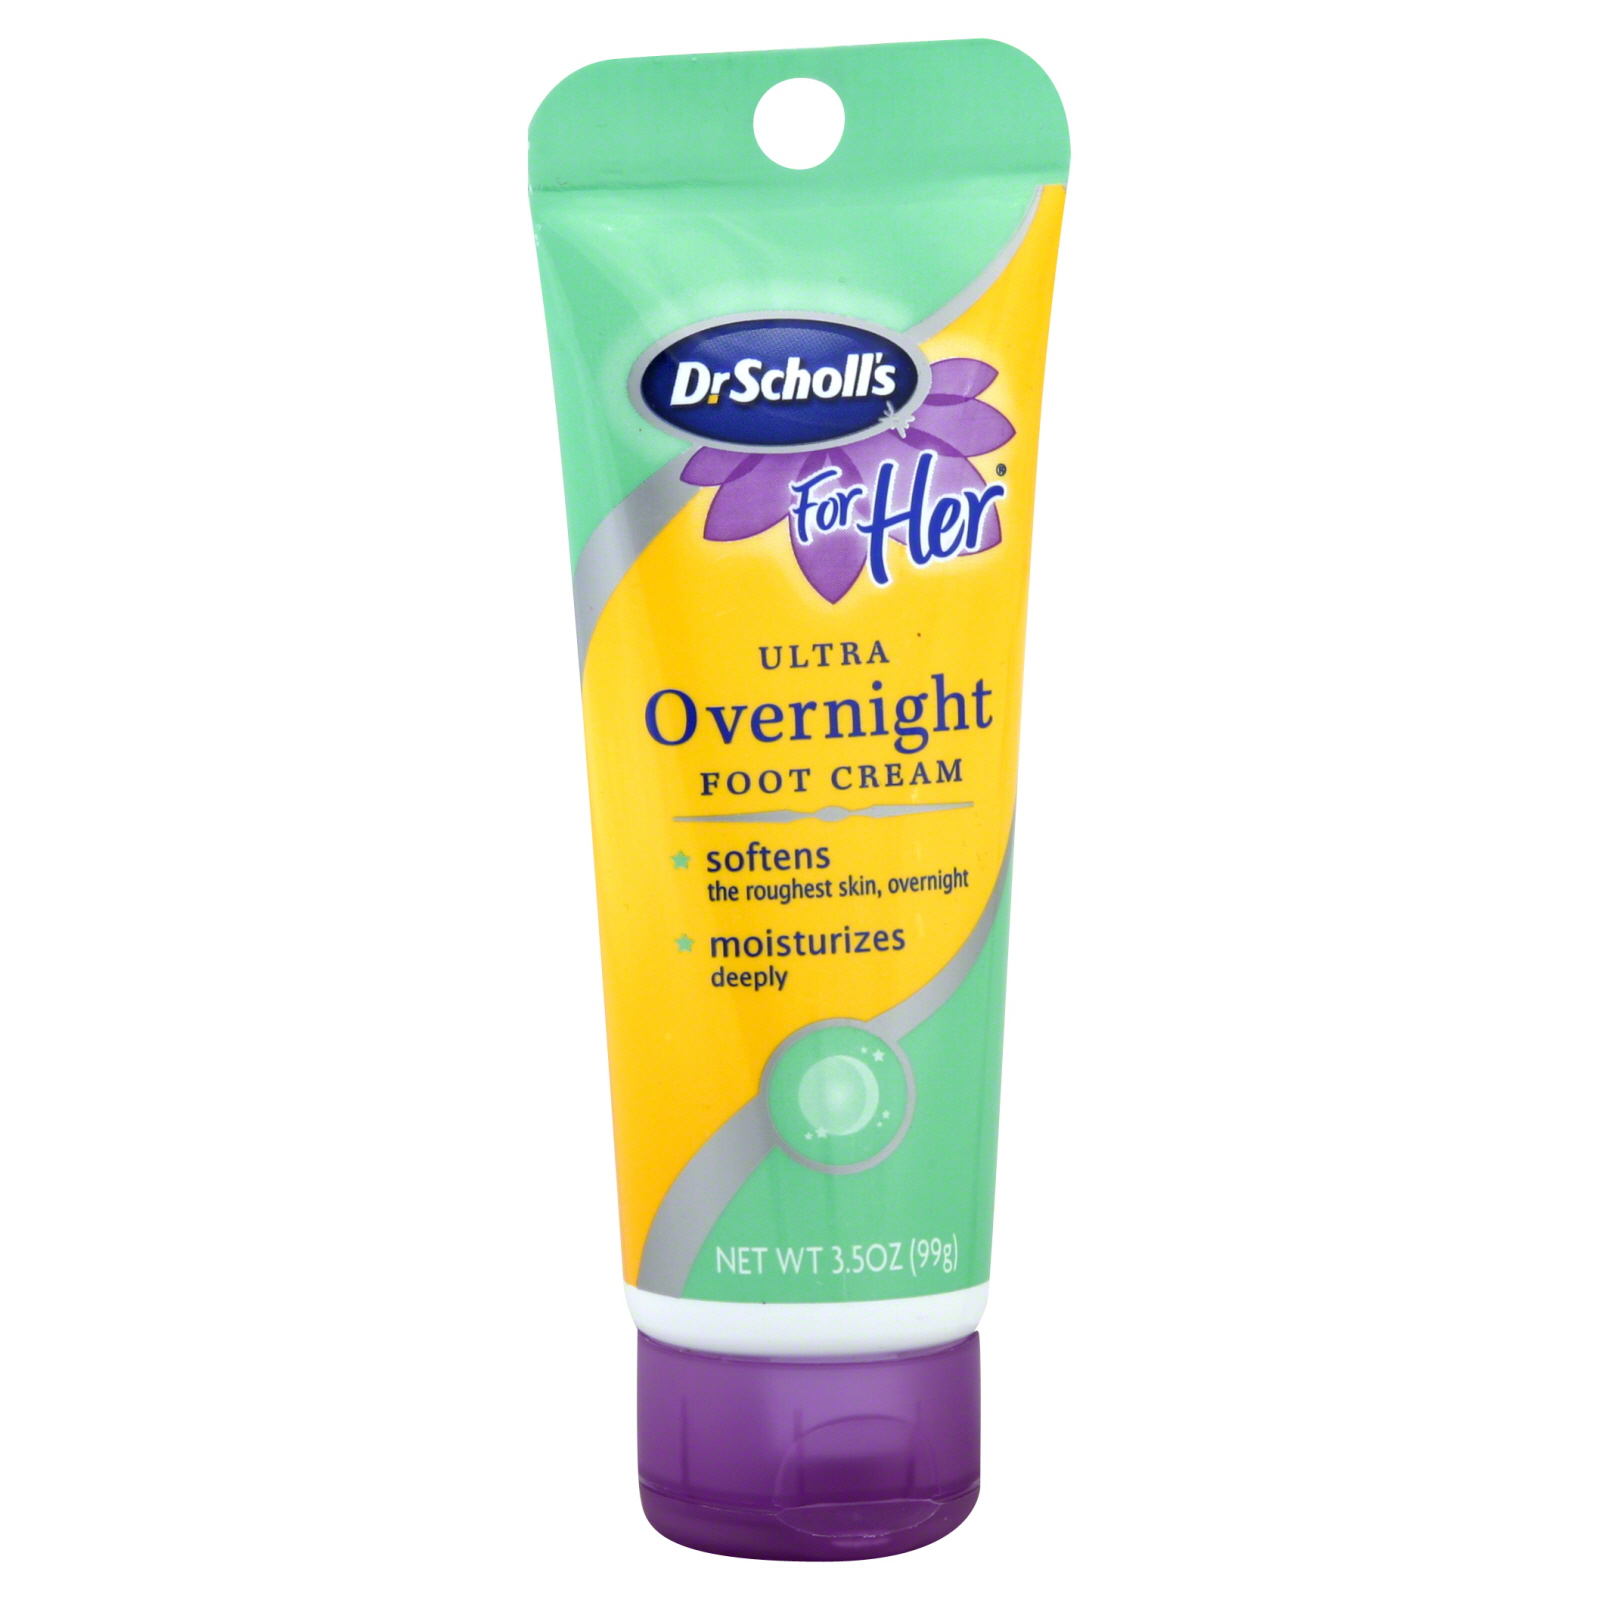 Dr. Scholl's For Her Foot Cream, Ultra Overnight, 3.5 oz (99 g)